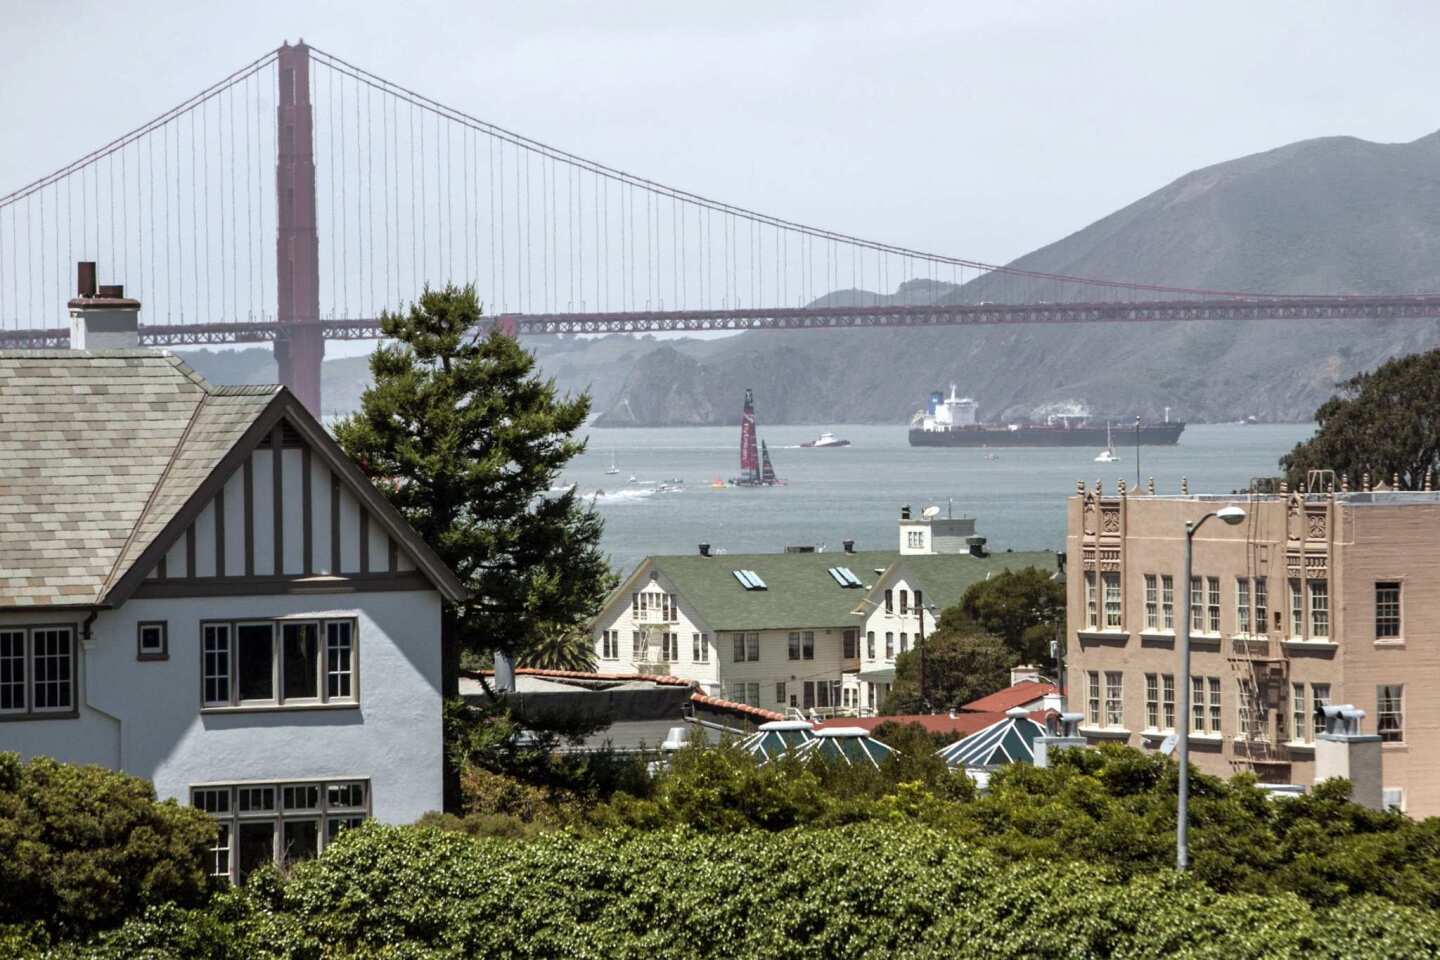 Emirates Team New Zealand sails during the round robin one yacht races of the Luis Vuitton Cup challenger series in the 34th America's Cup in San Francisco